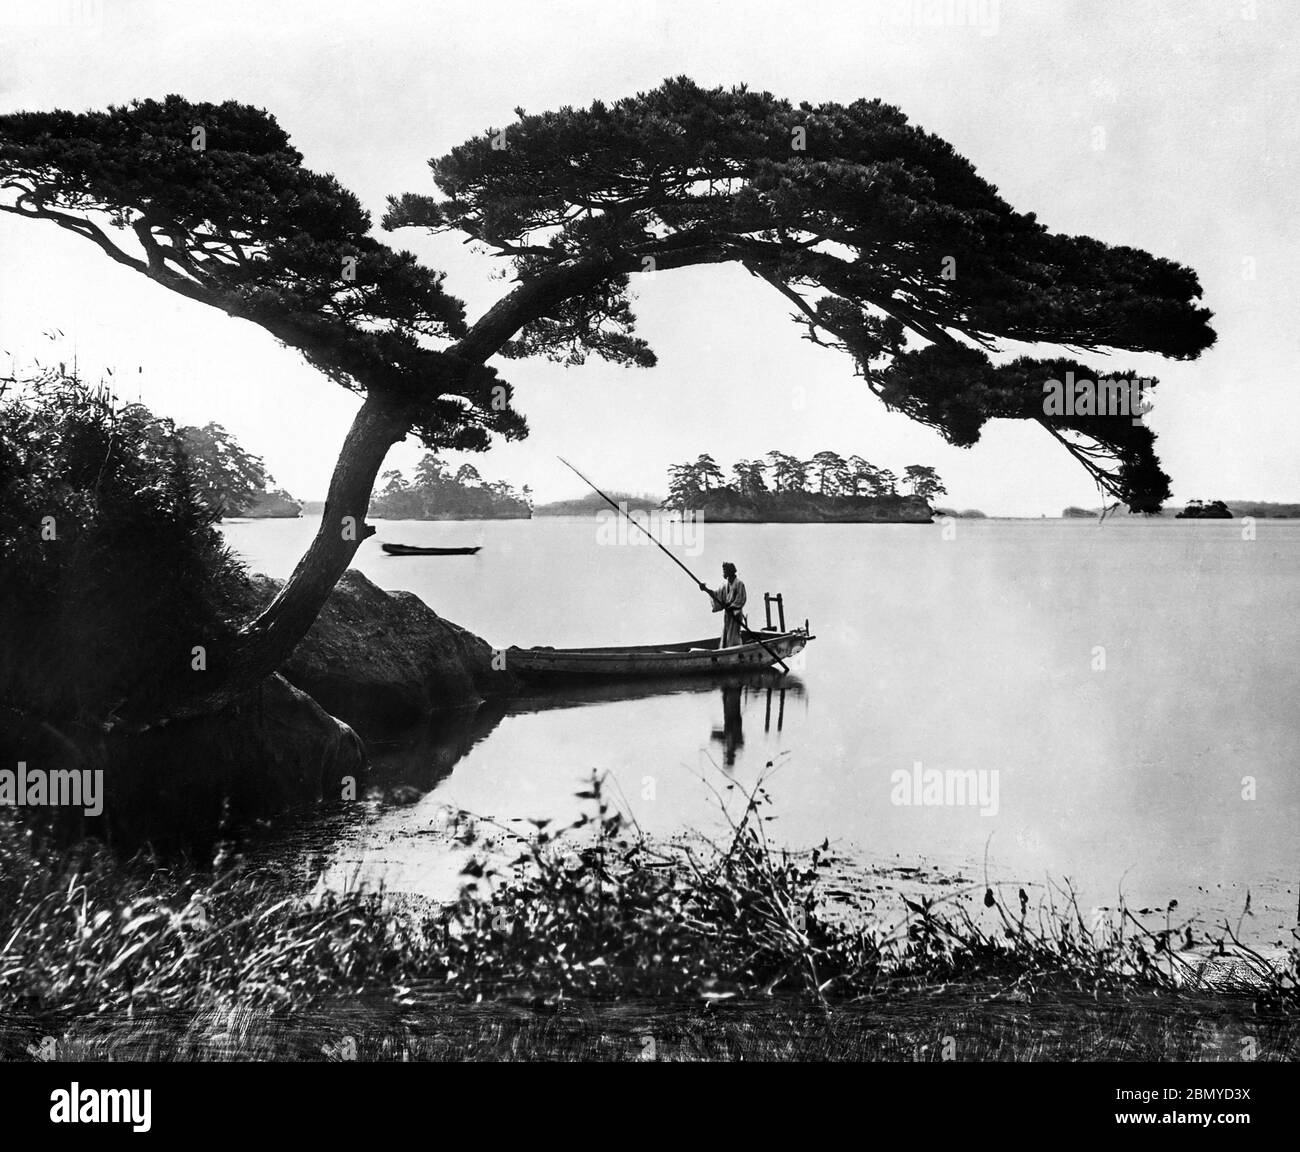 [ 1890s Japan - Japanese Boatman in Matsushima ] —   A boat under a beautiful pine tree in Matsushima, Miyagi Prefecture. The 260 tiny islands covered in pines are listed as one of the Three Views of Japan (日本三景, Nihon Sankei), a canonical list of Japan's three most celebrated scenic sights.  From a series of glass slides published (but not photographed) by Scottish photographer George Washington Wilson (1823–1893). Wilson’s firm was one of the largest publishers of photographic prints in the world.  19th century vintage glass slide. Stock Photo